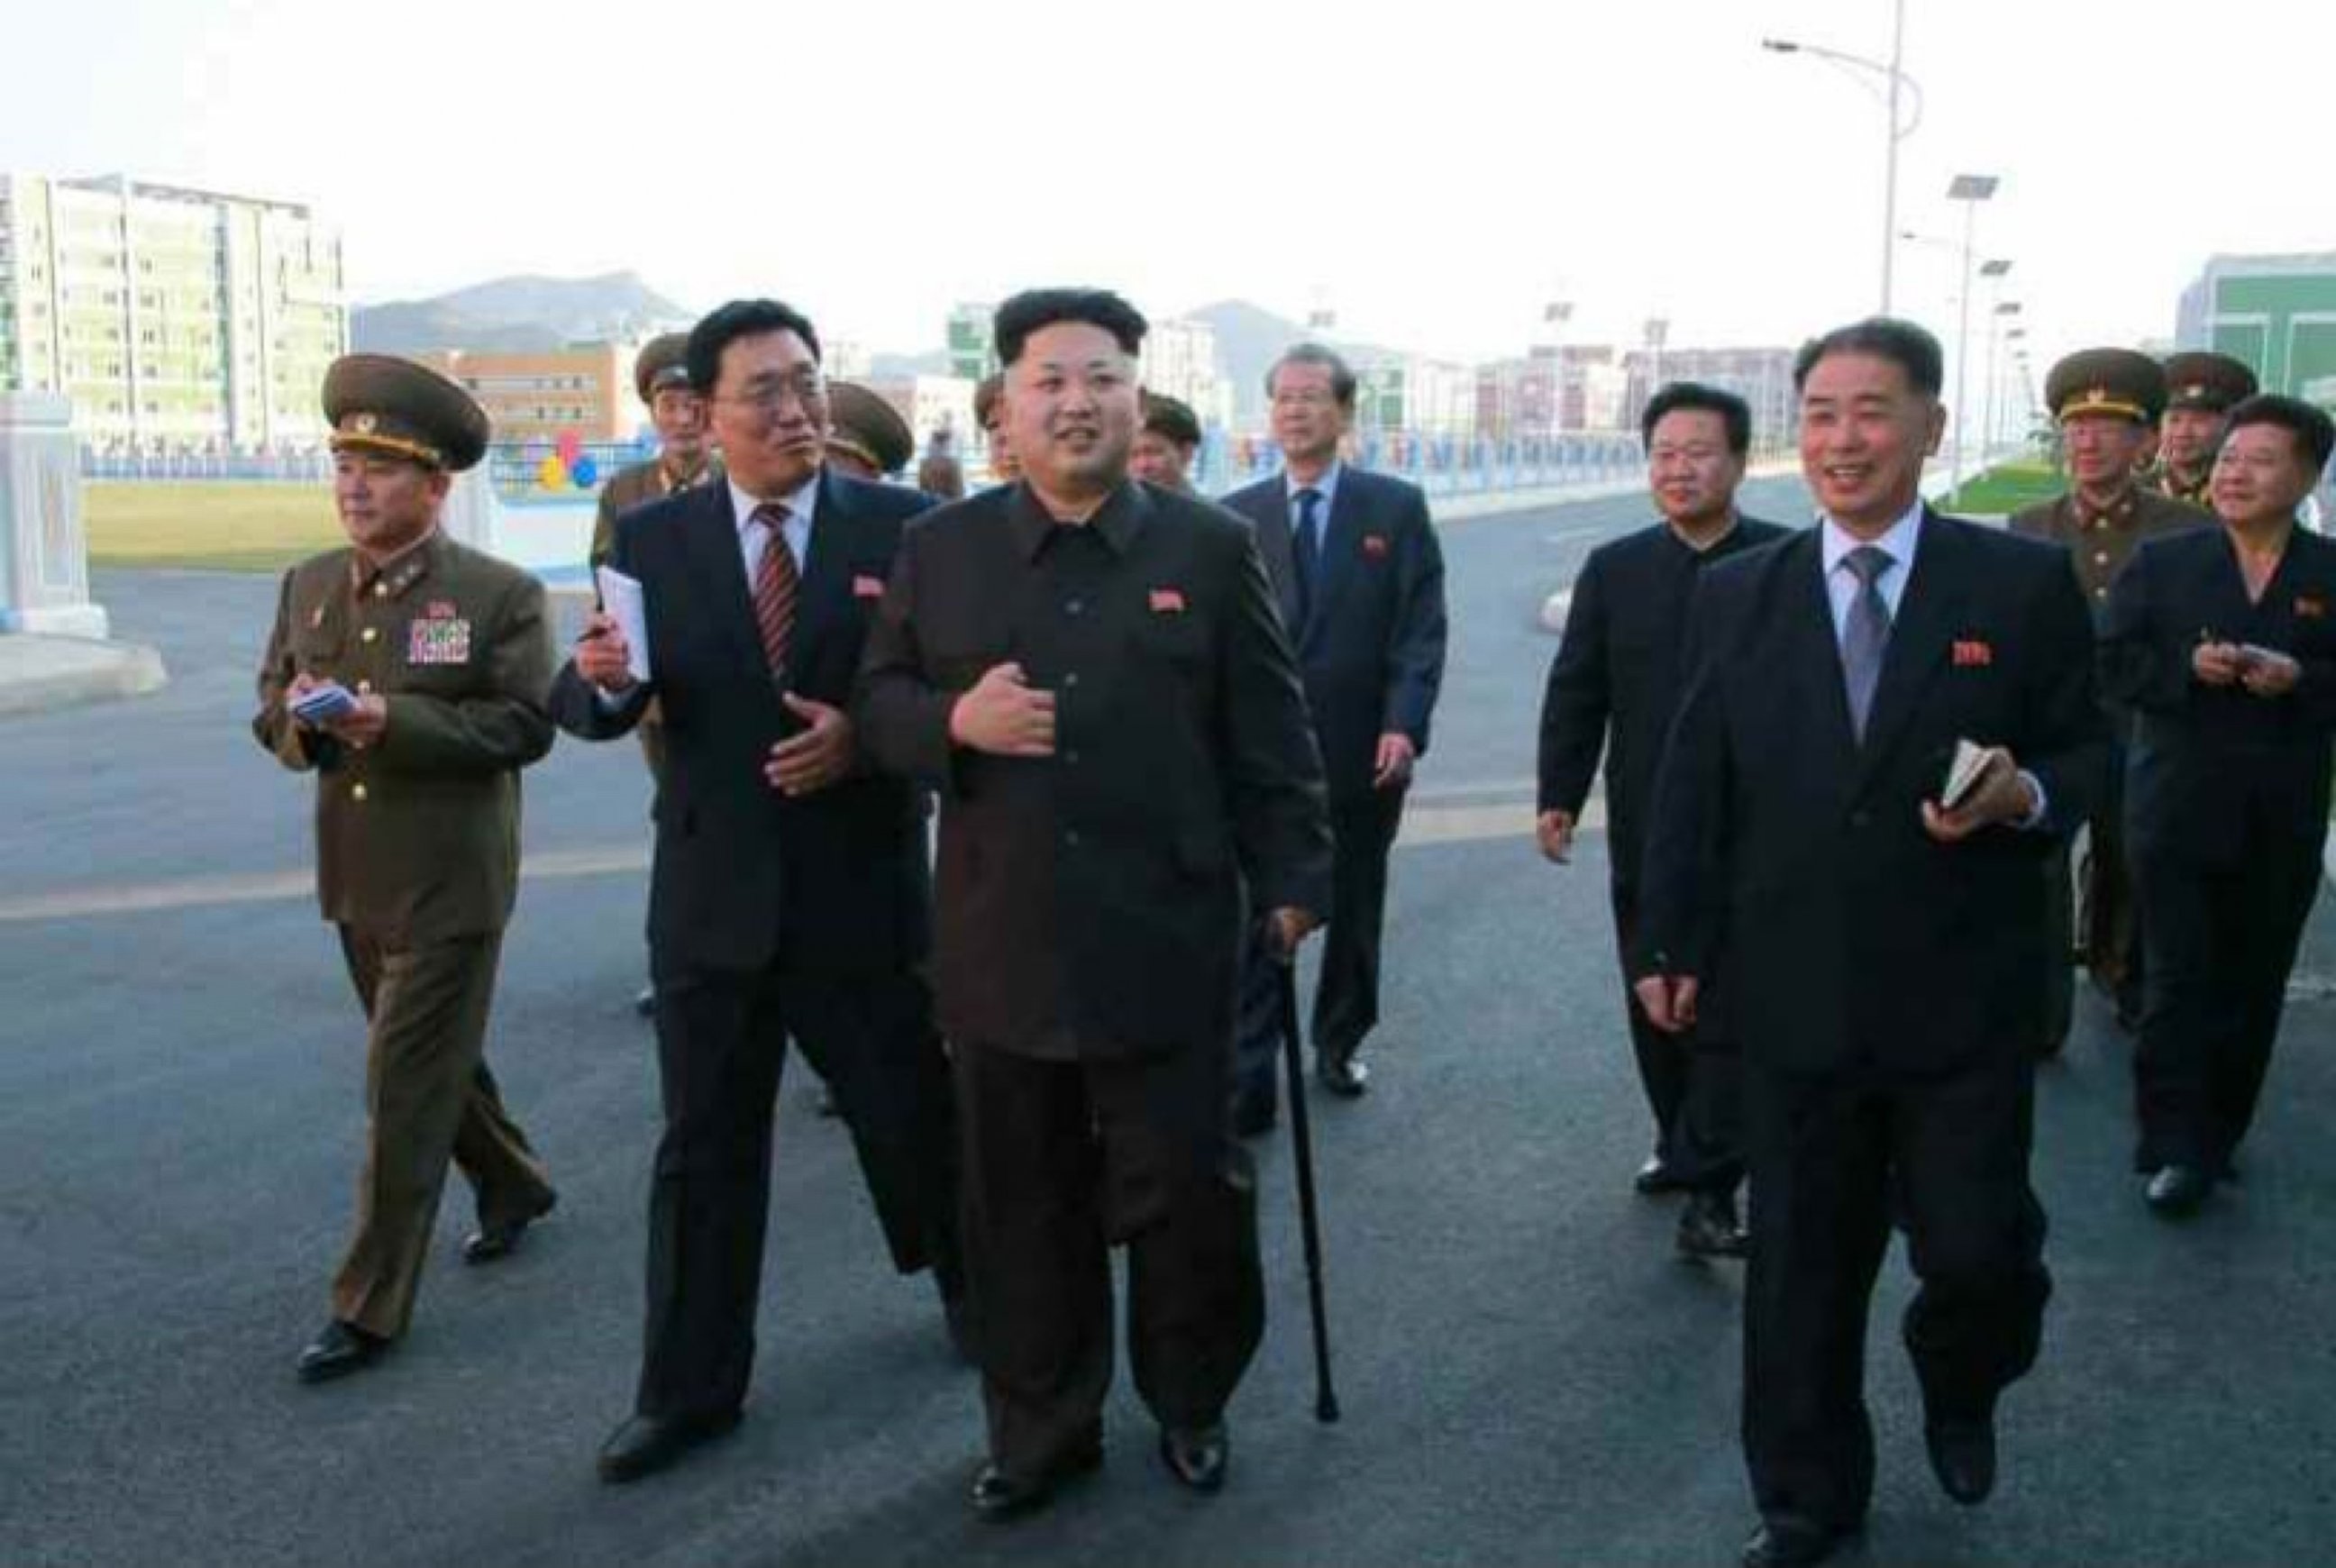 PHOTO: A photo released by North Korea's official news agency on Oct 14, 2014 shows North Korean leader Kim Jong-un using a cane during his first public appearance in weeks.